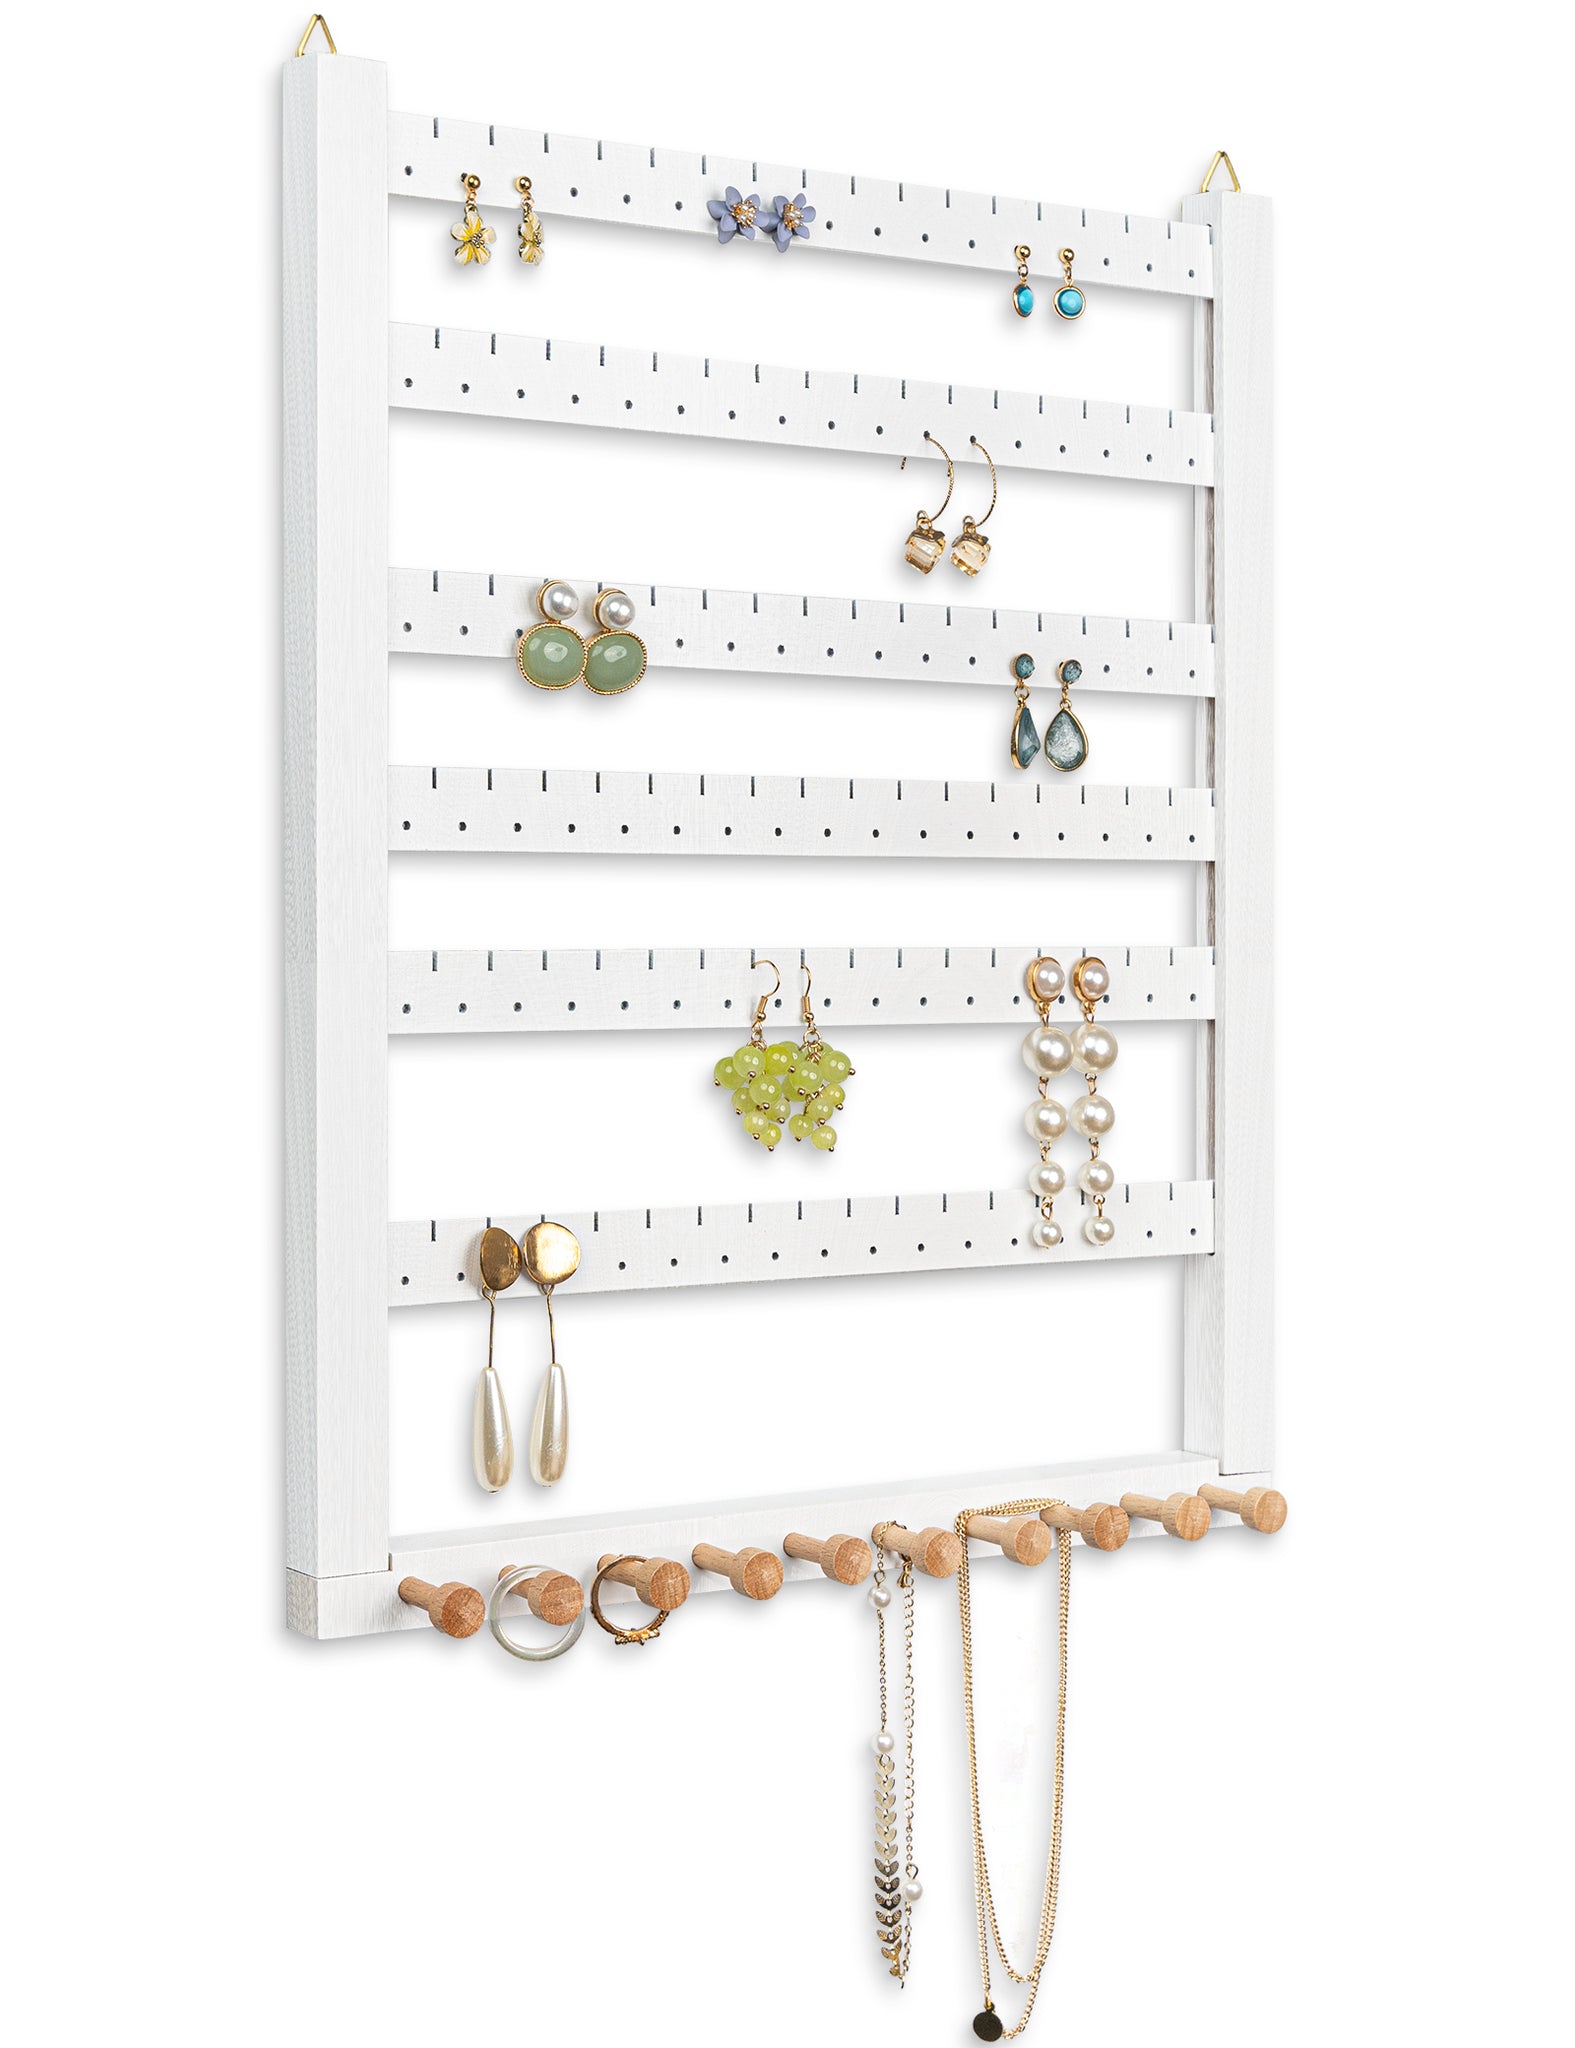 Jewelry Display Earring Organizer, Hanging, Peruvian Walnut, Wood. Holds 36  Pairs, 15 Peg Necklace Holder. Wall Mounted Jewelry Holder 